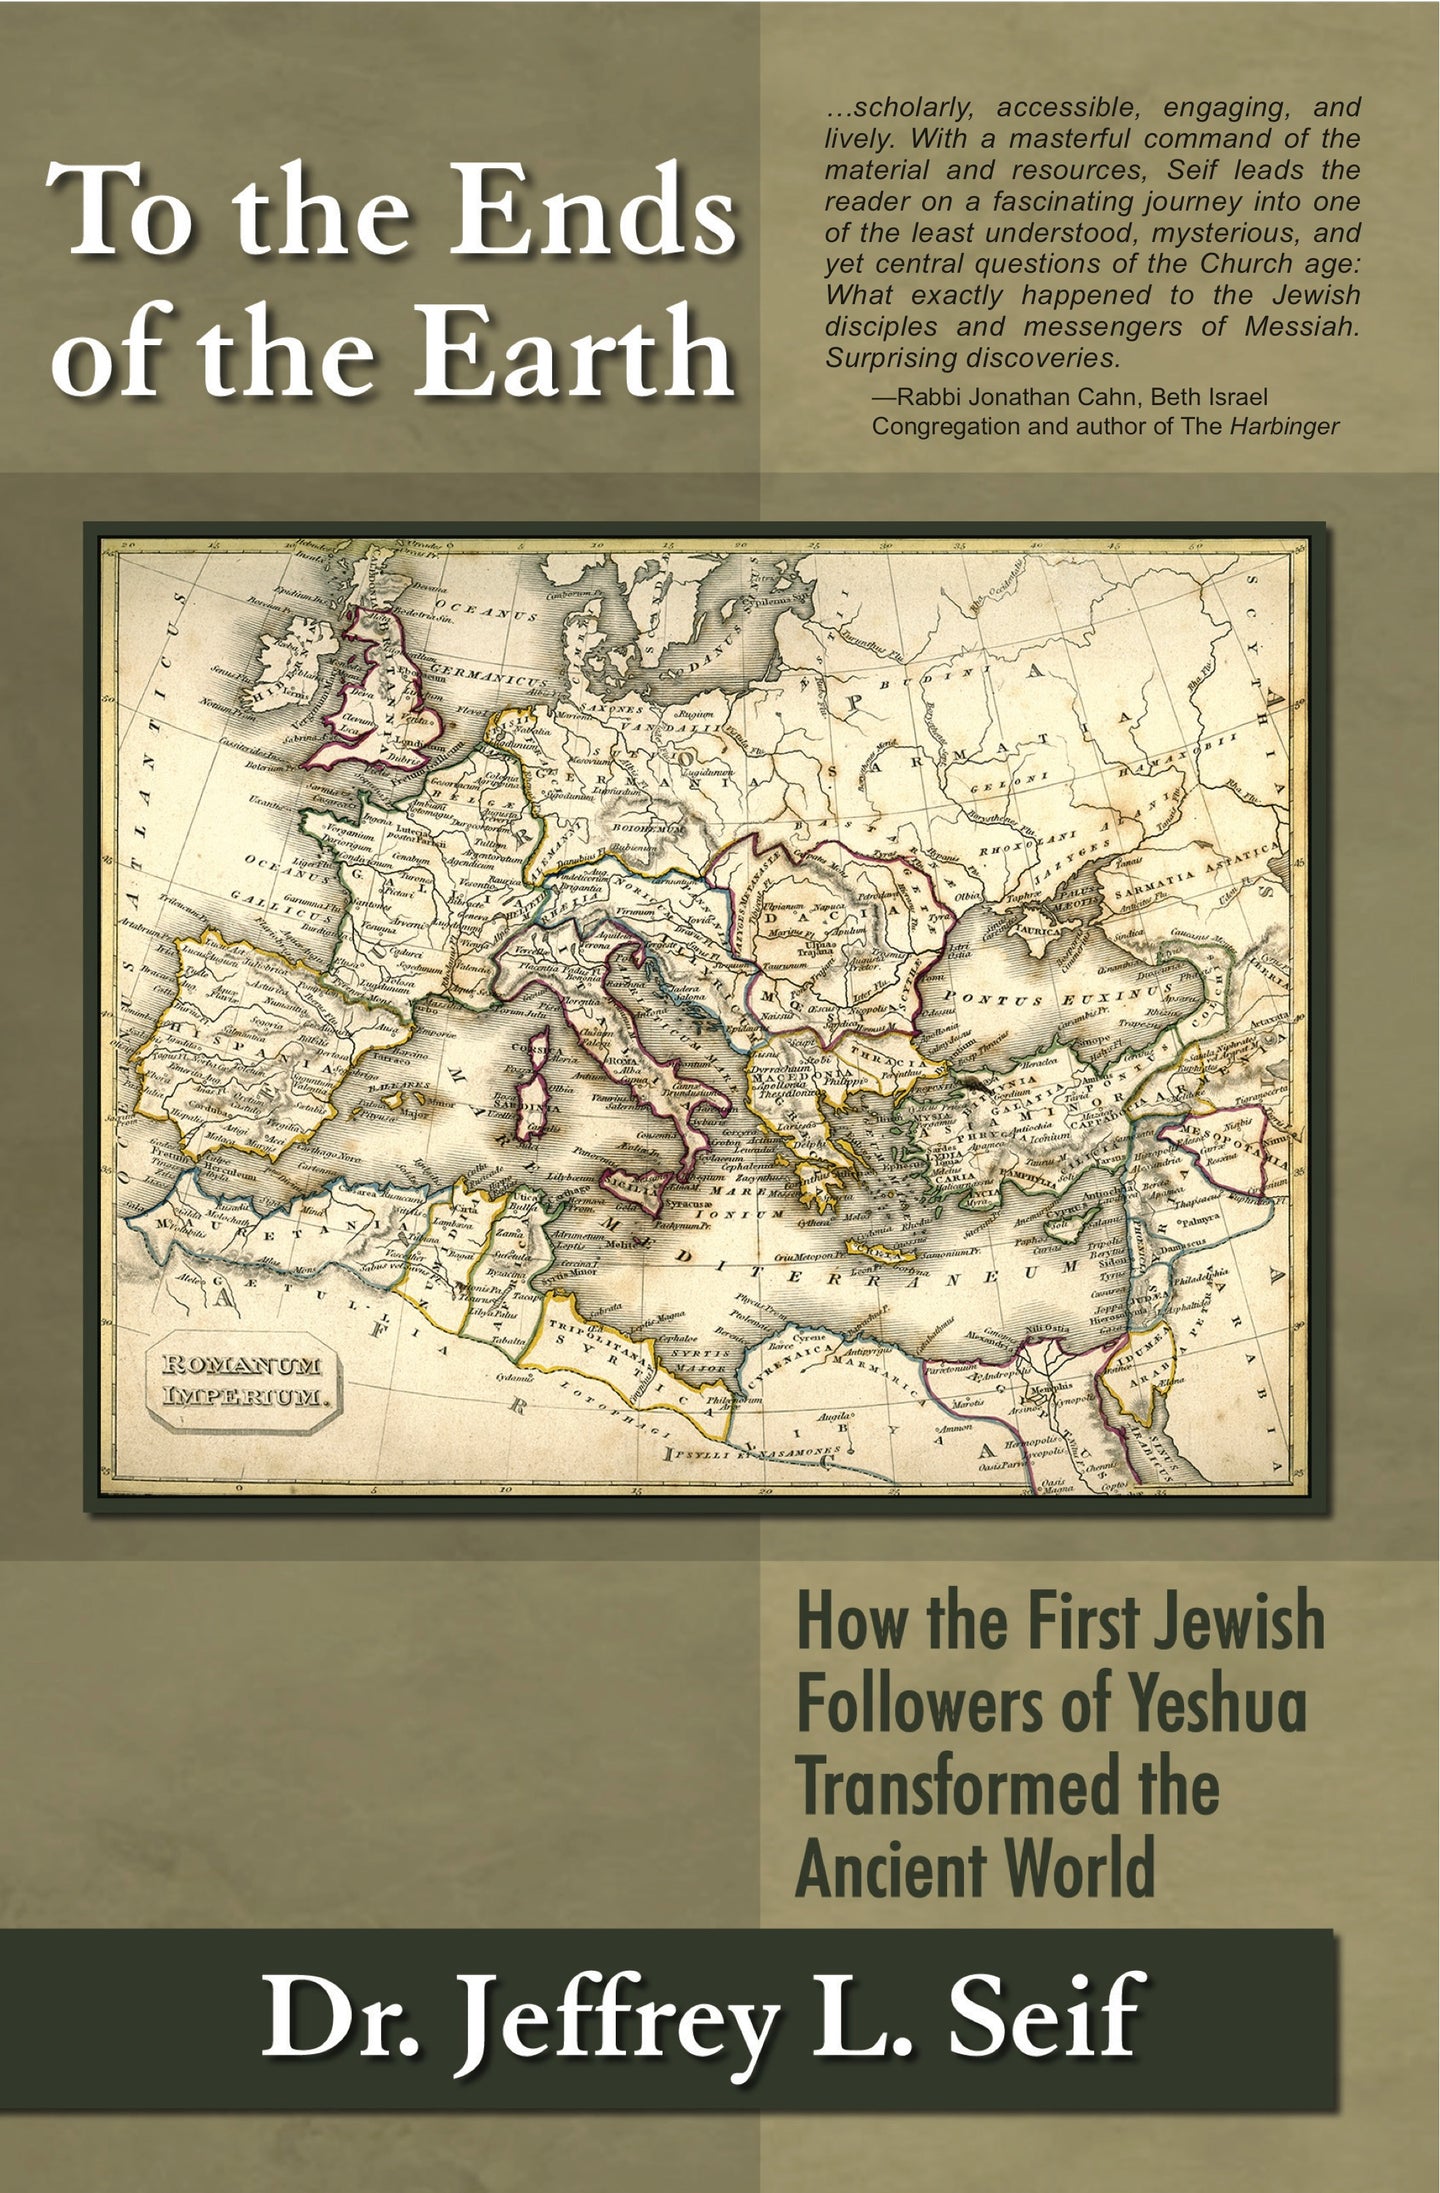 To the Ends of the Earth: How the First Followers of Yeshua Transformed the Ancient World by Jeffrey Seif